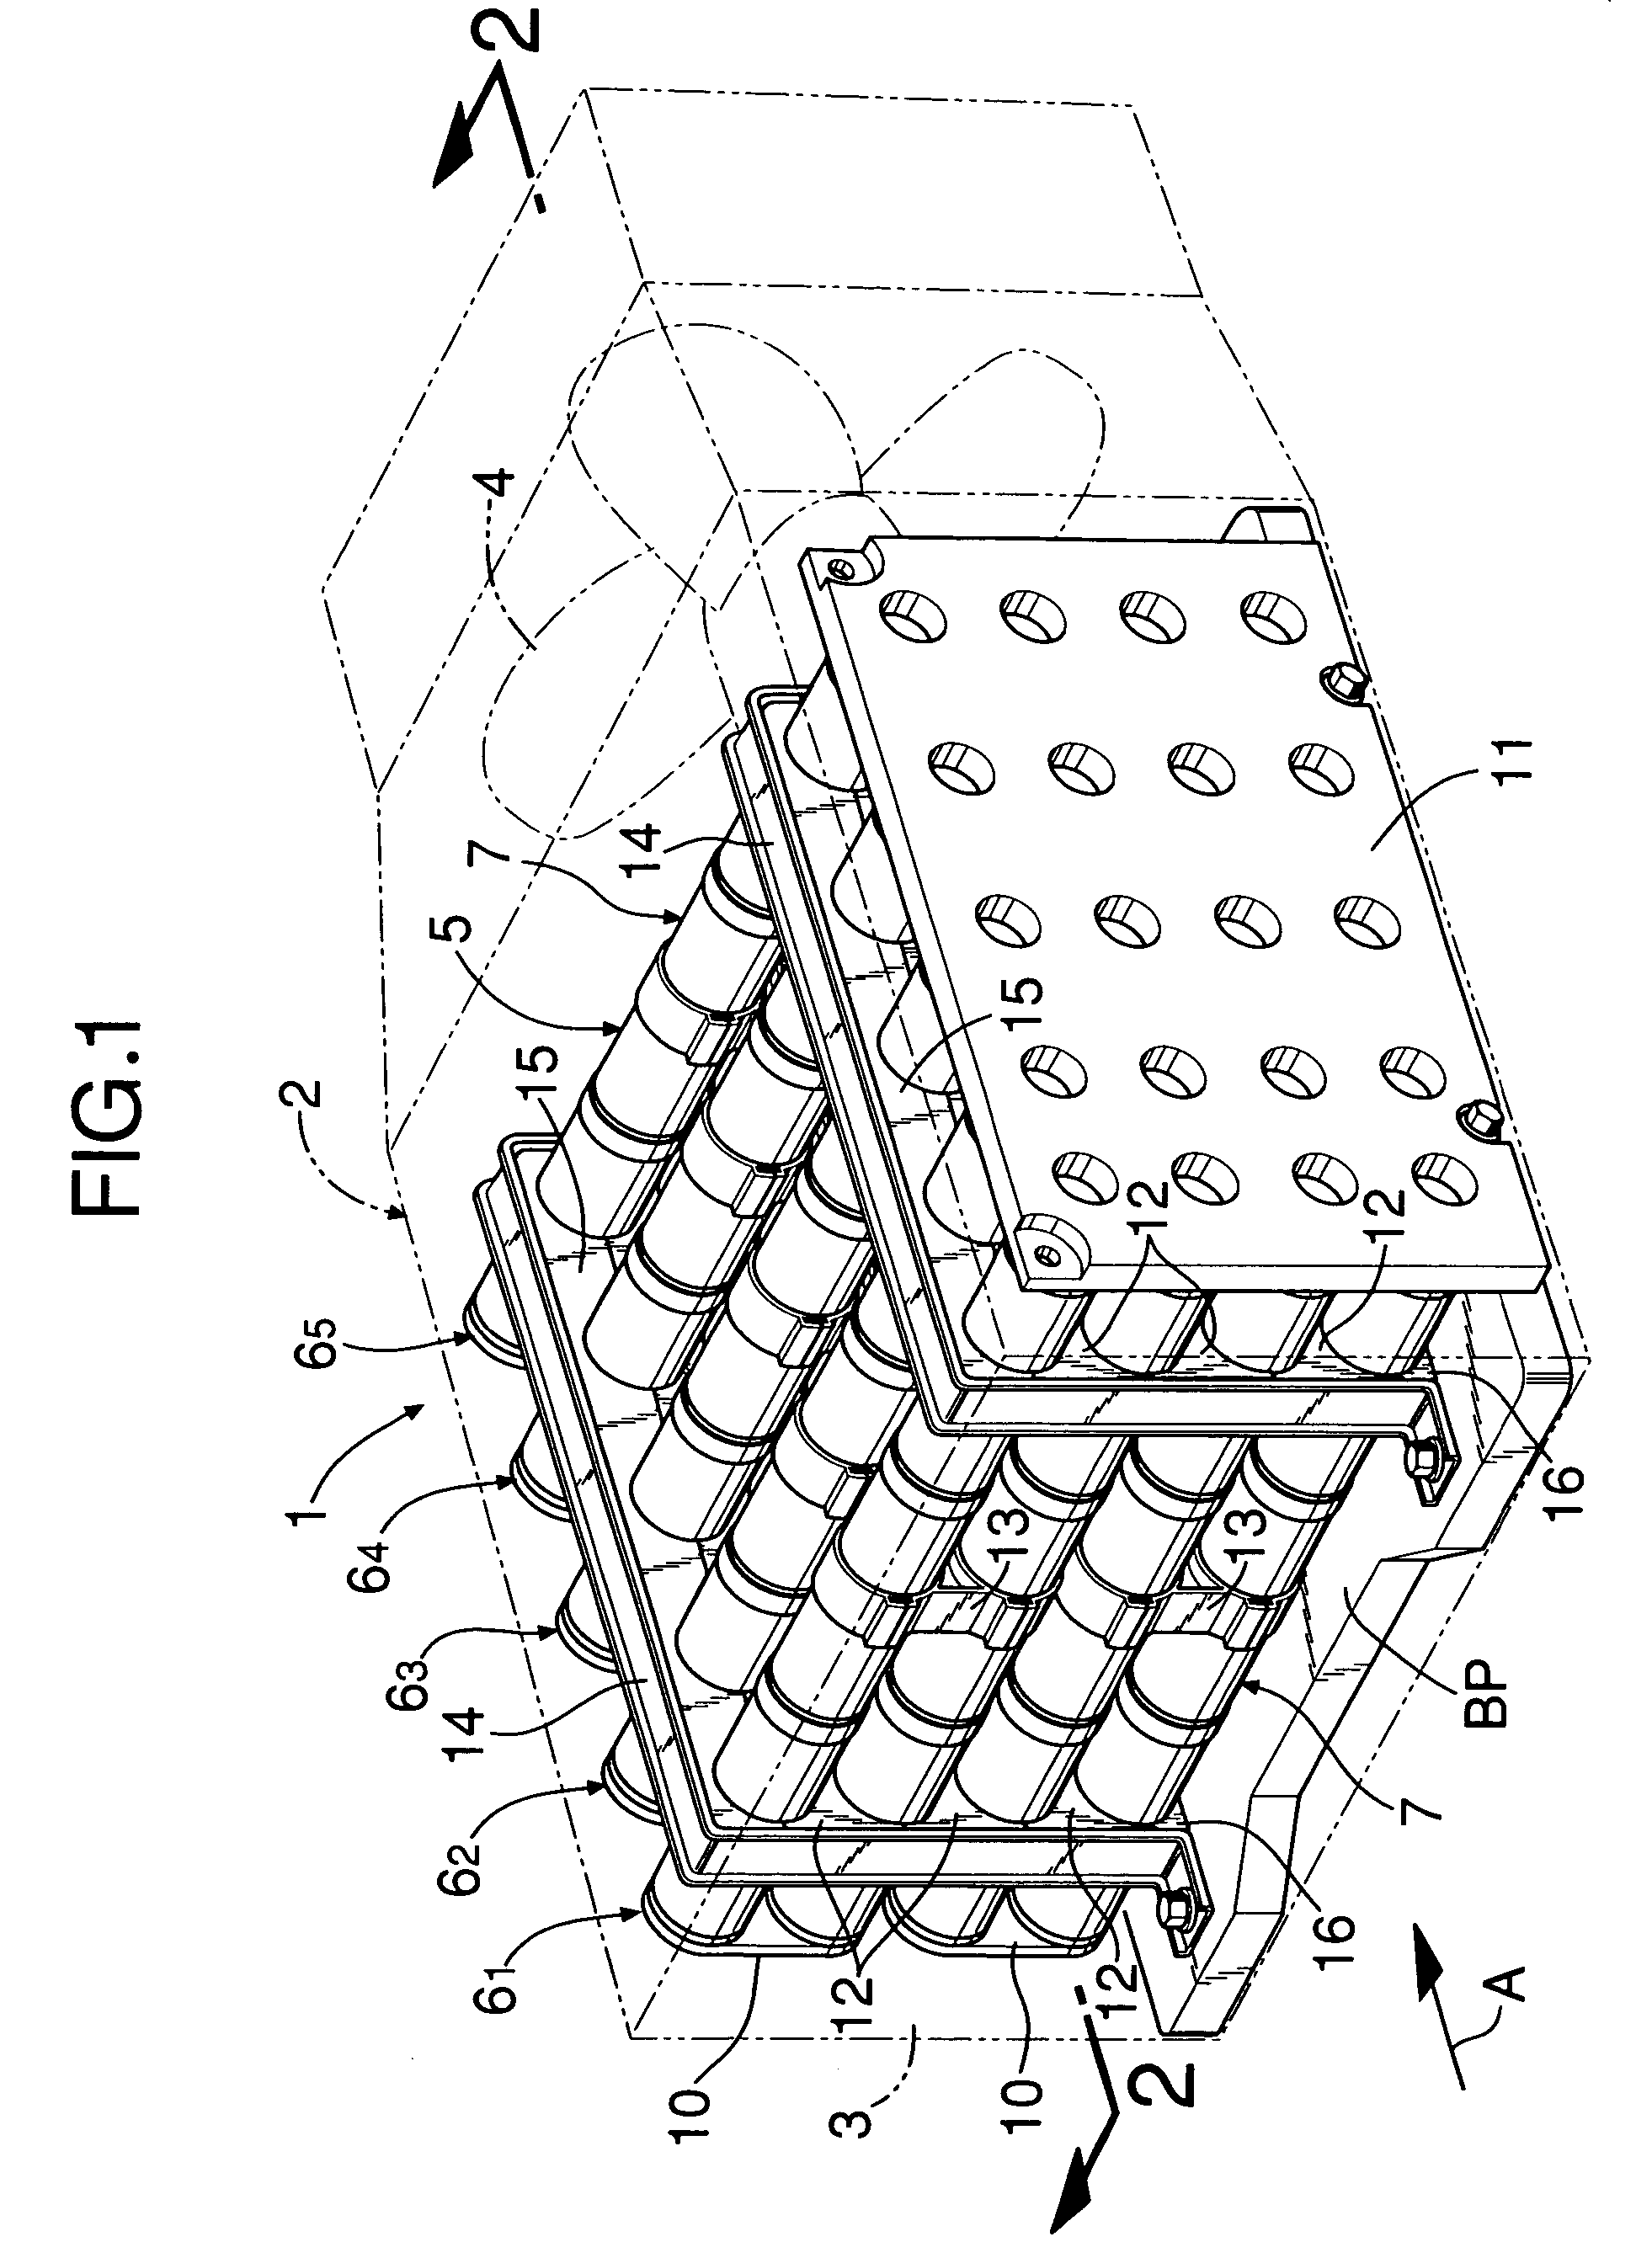 Battery-driven power source apparatus